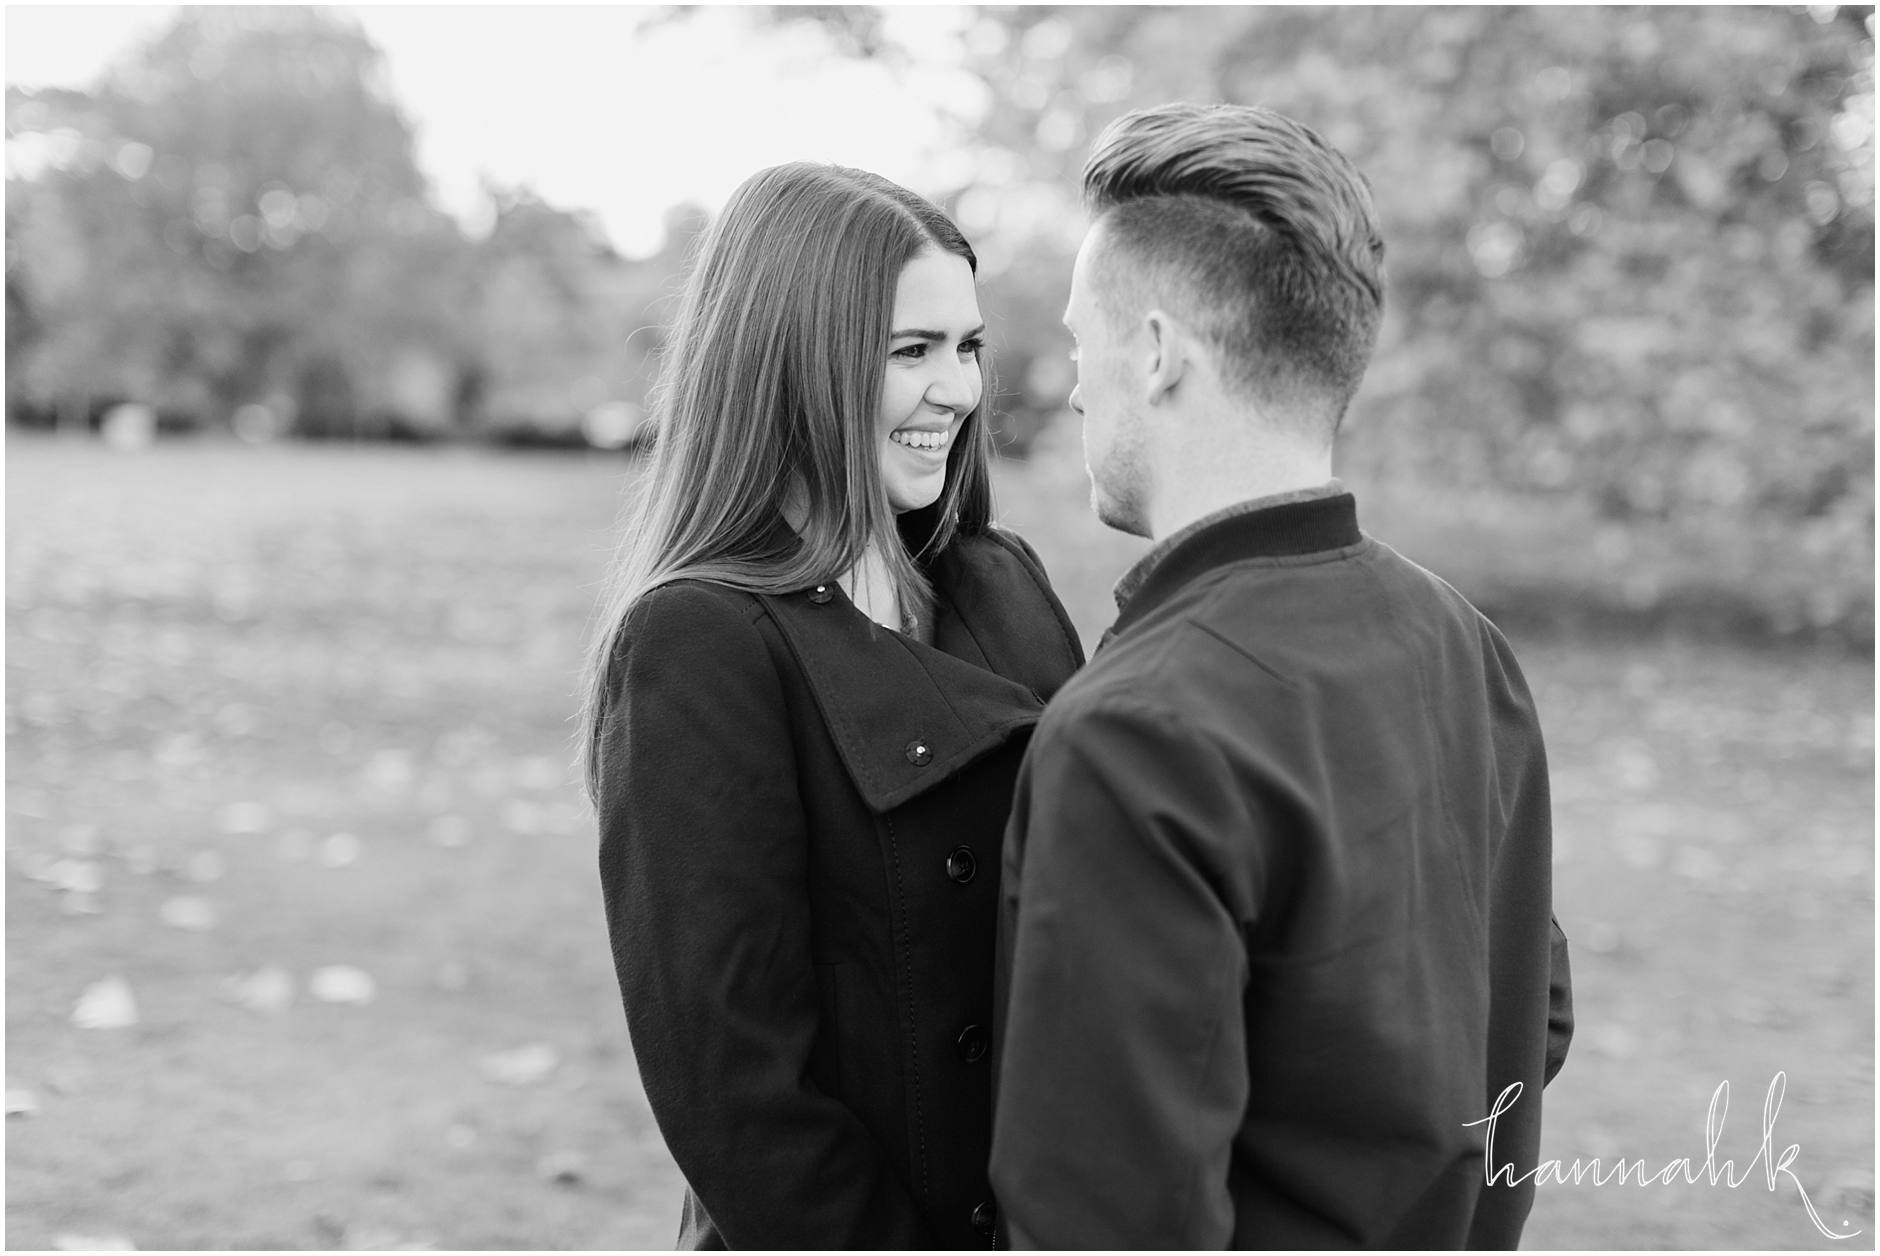 hannah-k-photography-coventry-warwickshire-west-midlands-engagement-photographer-34